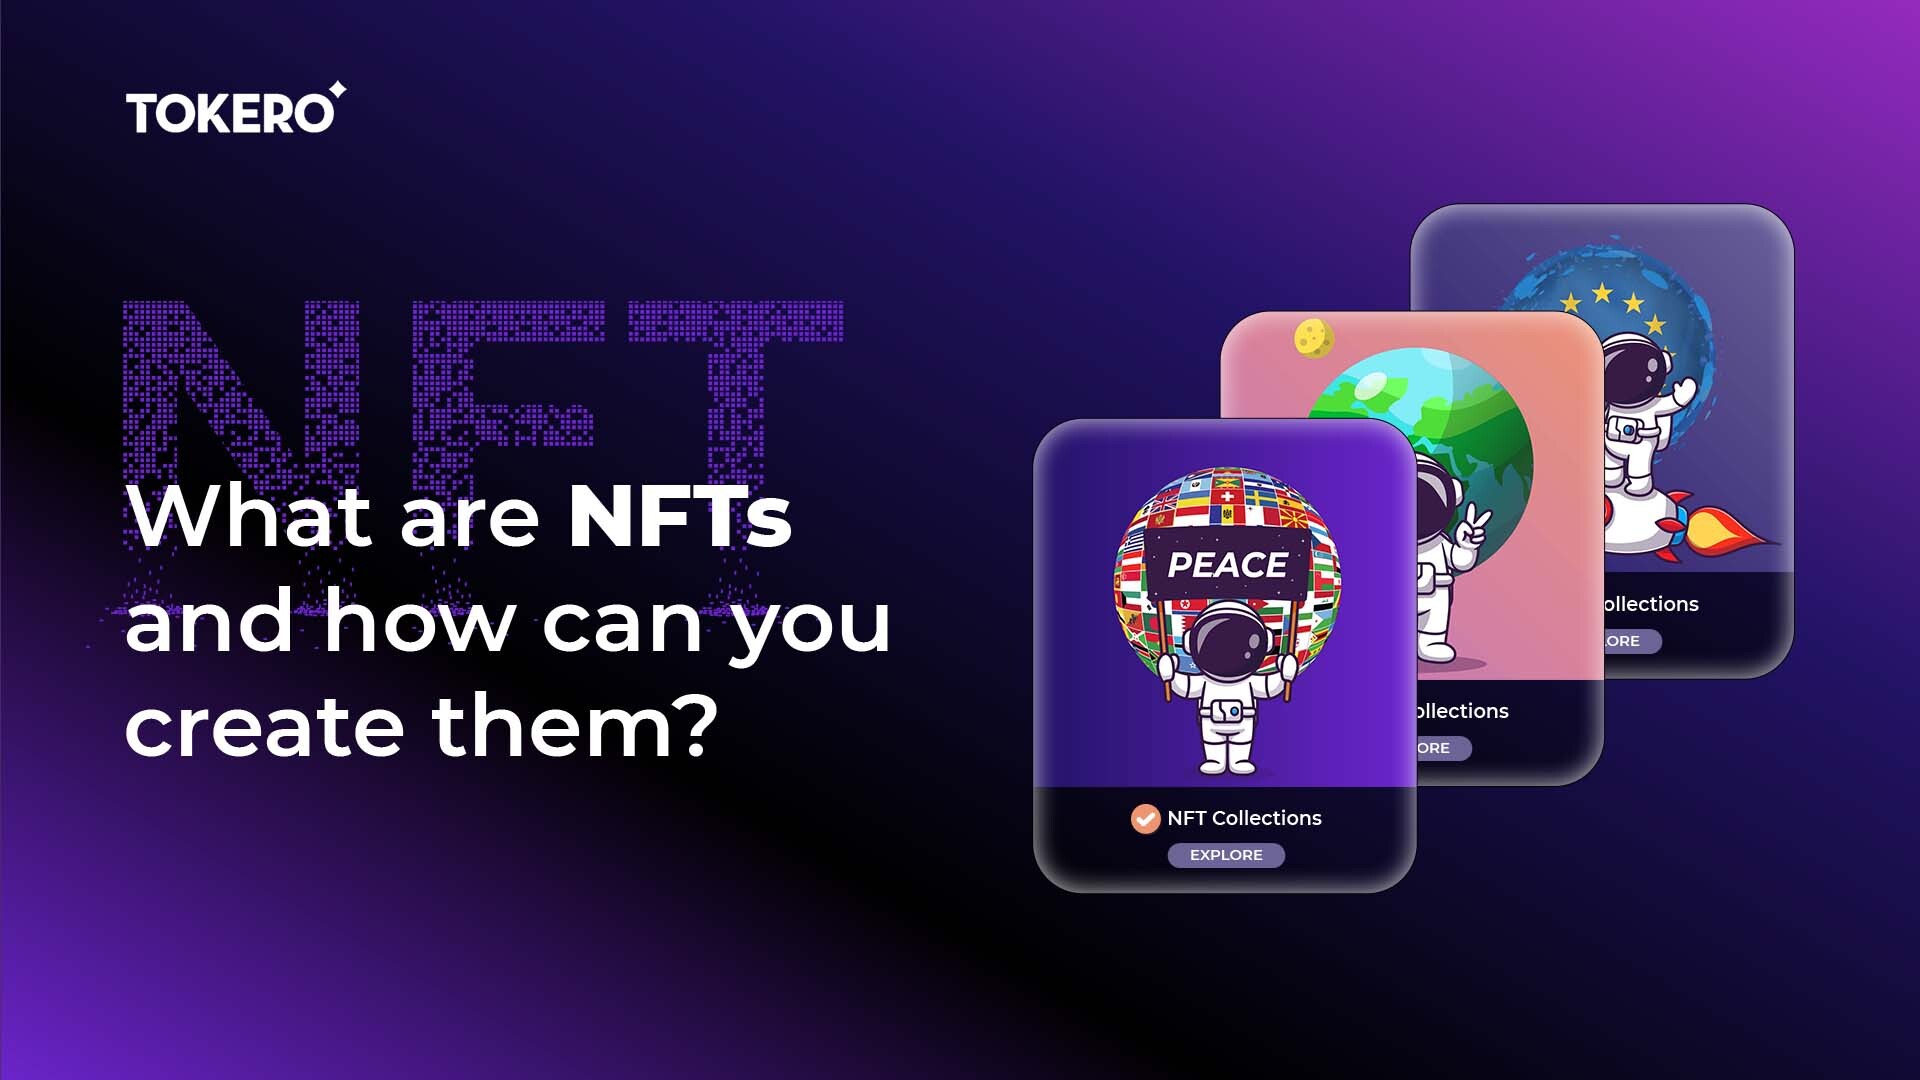 What are NFTs and how can you create them?